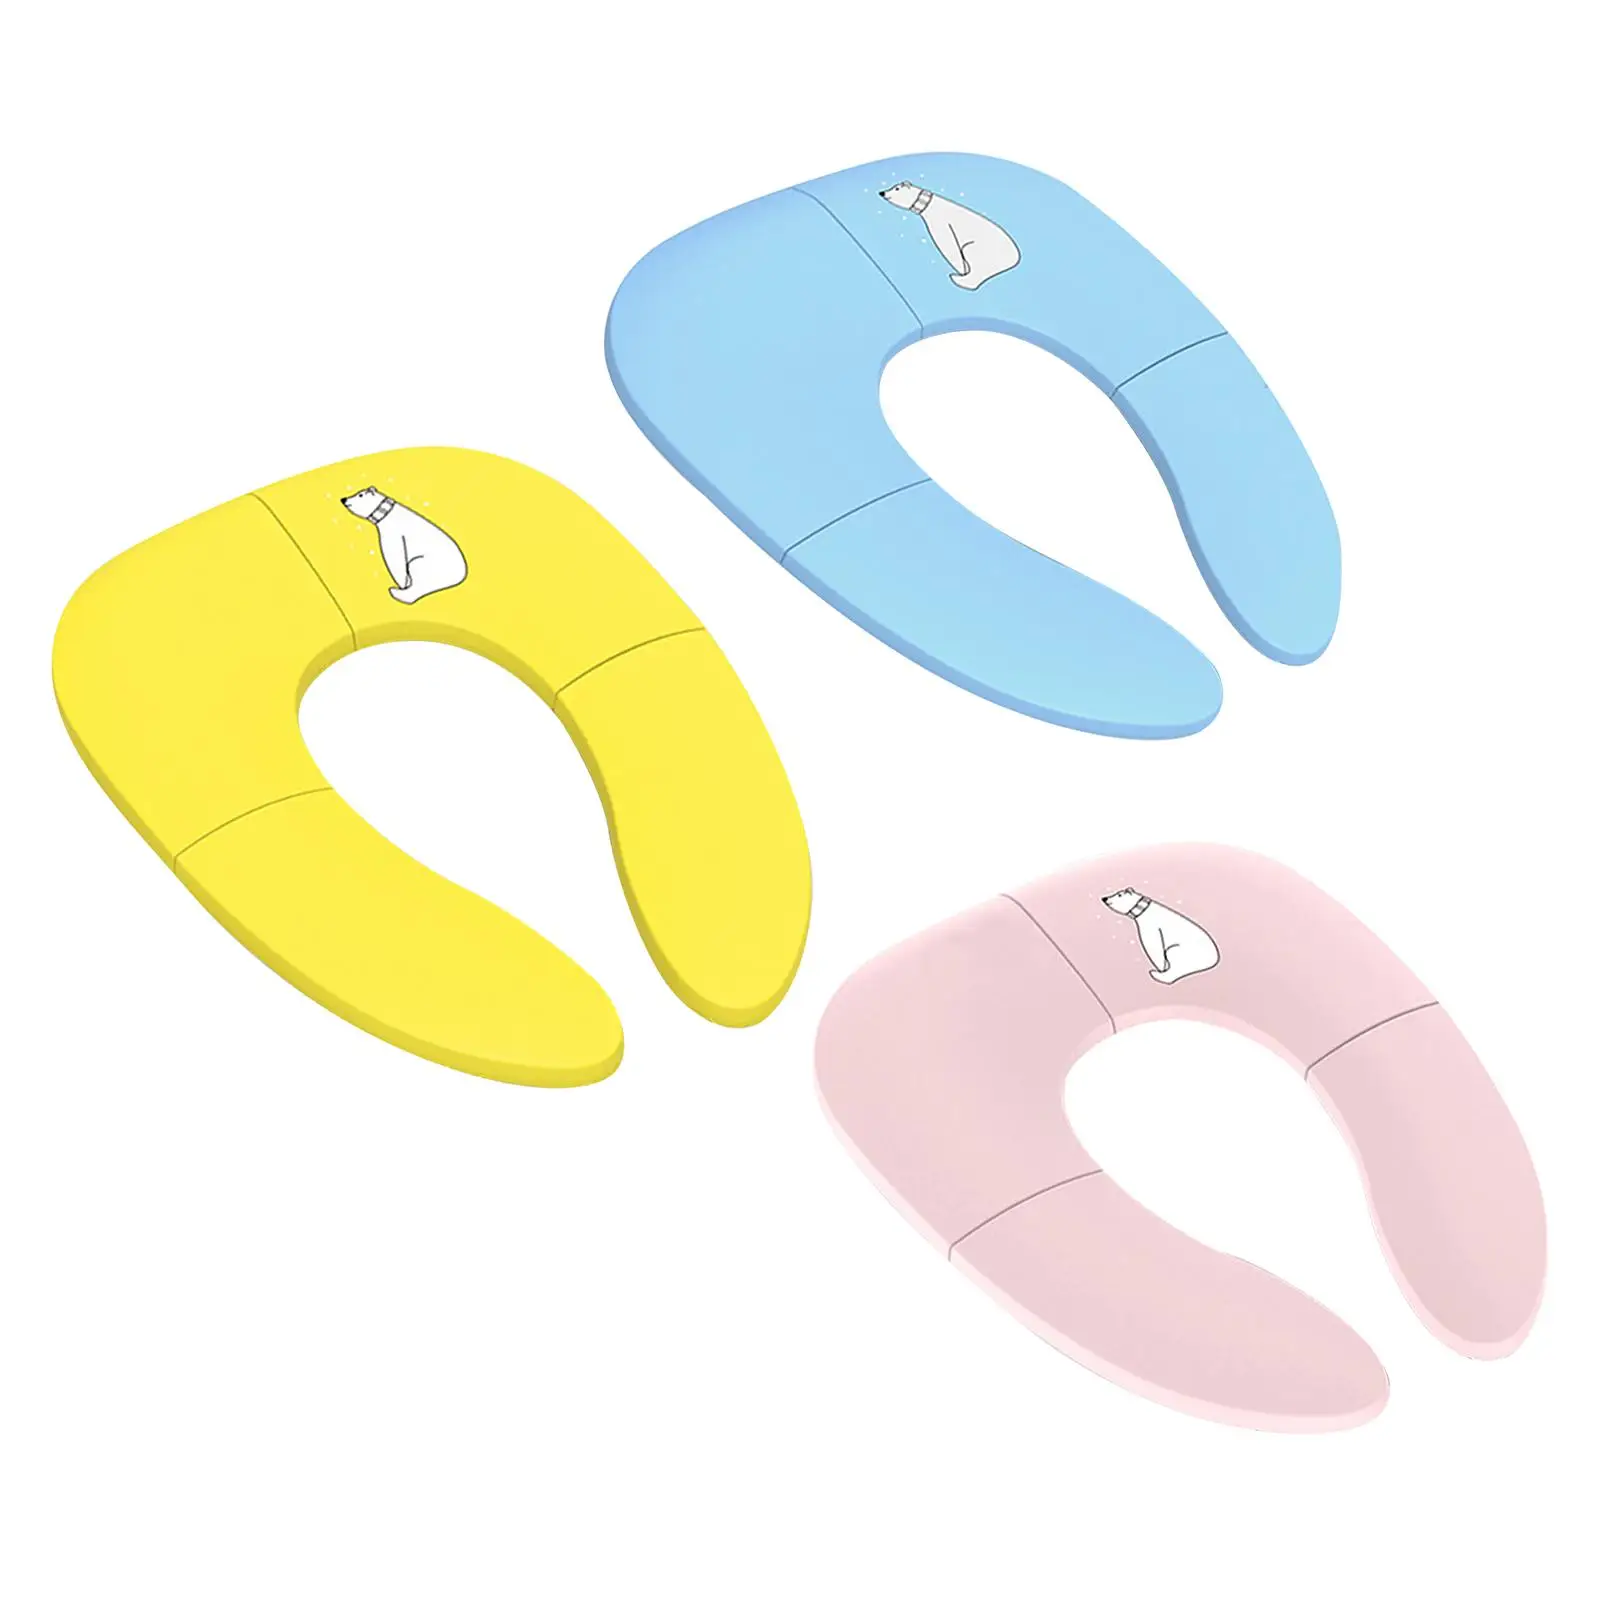 Folding Toilet Ring Non Slip Upgraded Toilet pad for Girls Baby Adults